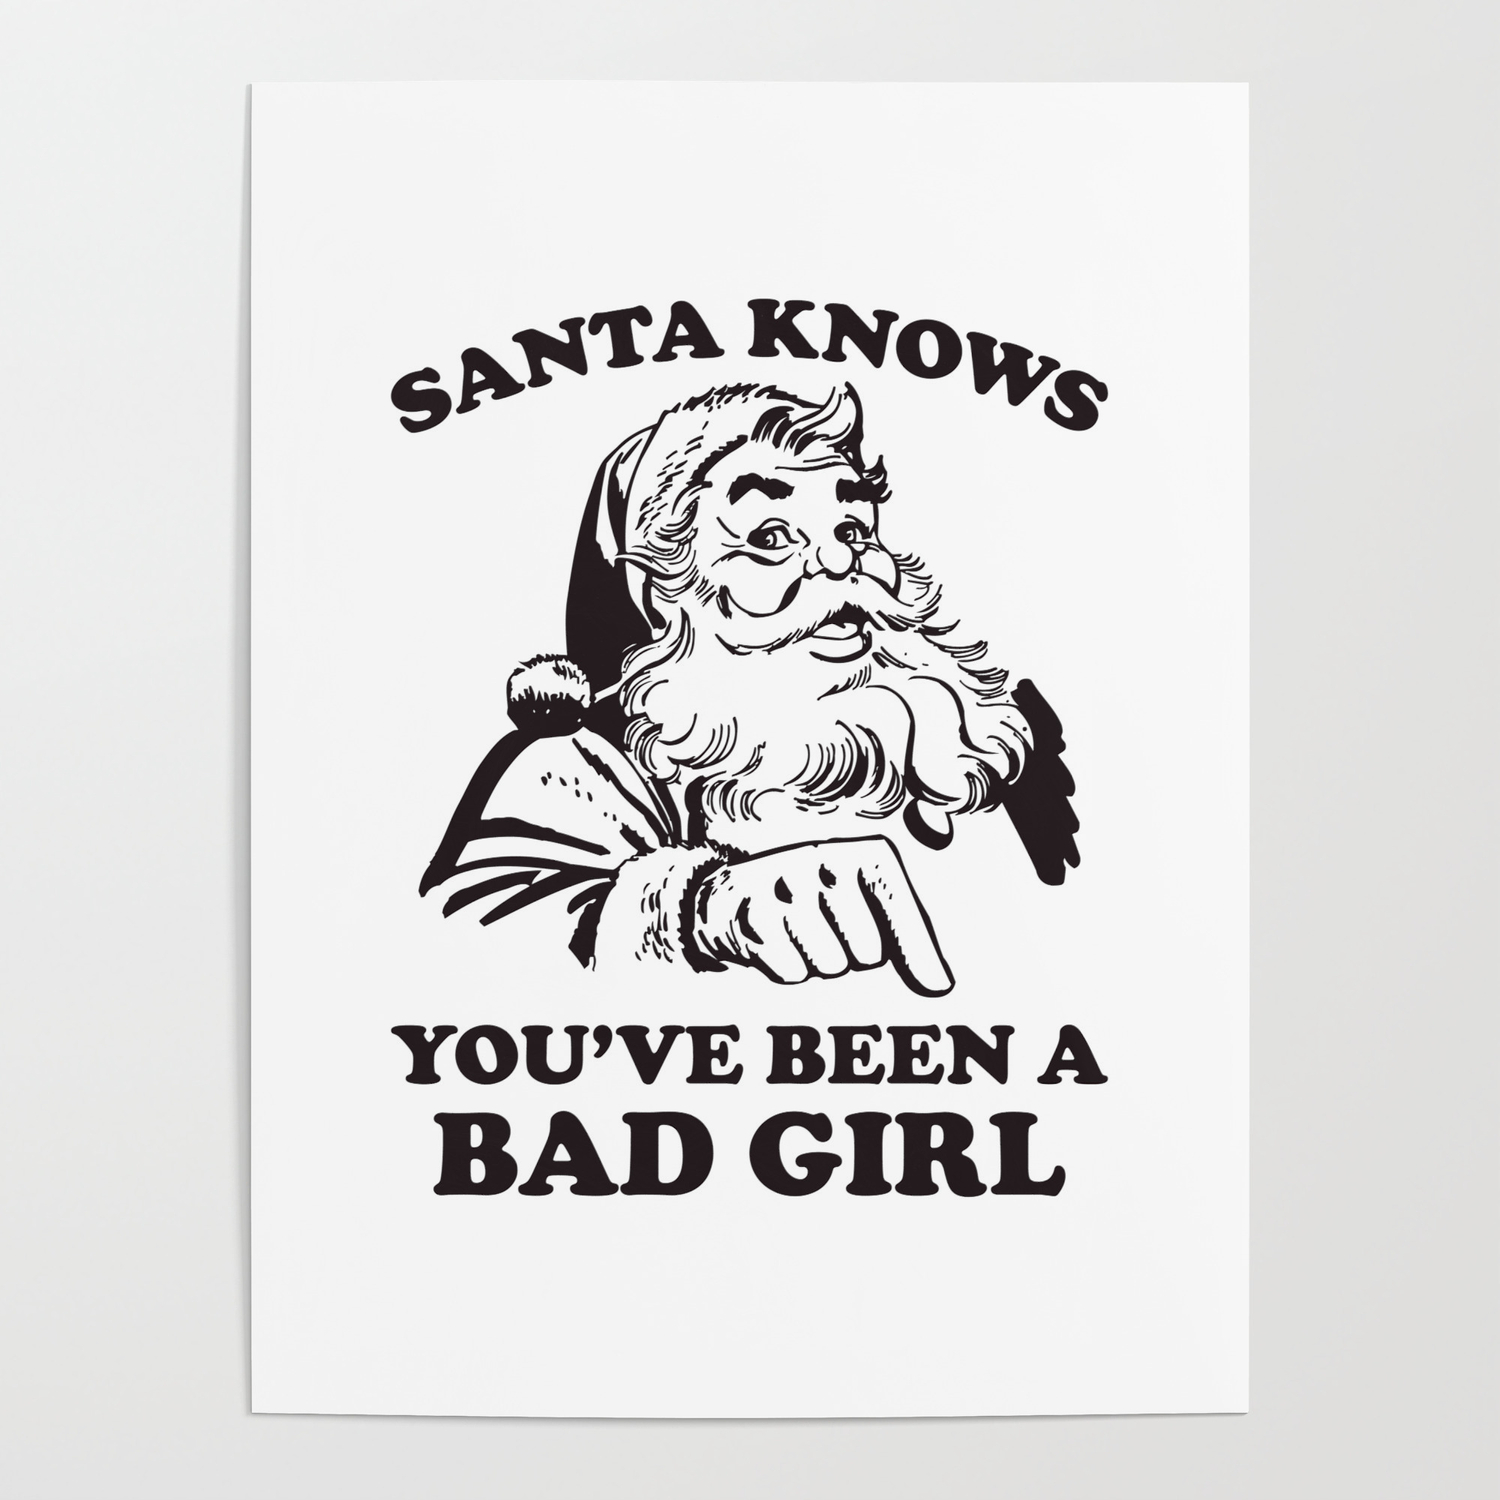 Santa Knows You've Been A Bad Girl Funny Christmas Poster by TeeVision |  Society6